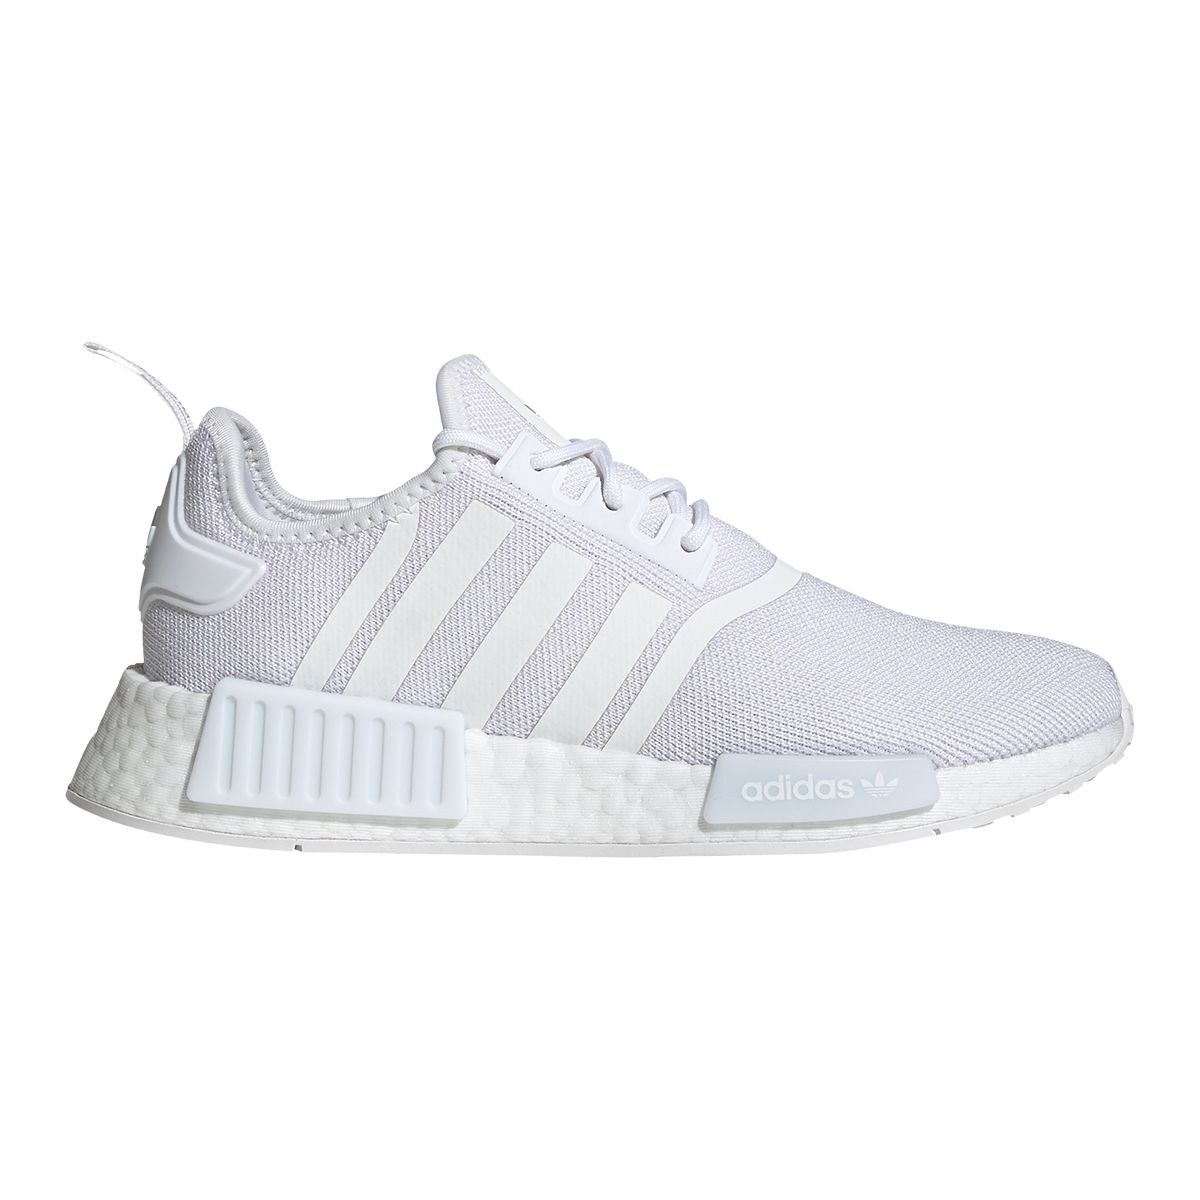 adidas Women's Nmd_R1 Boost Shoes  Sneakers Casual Knit